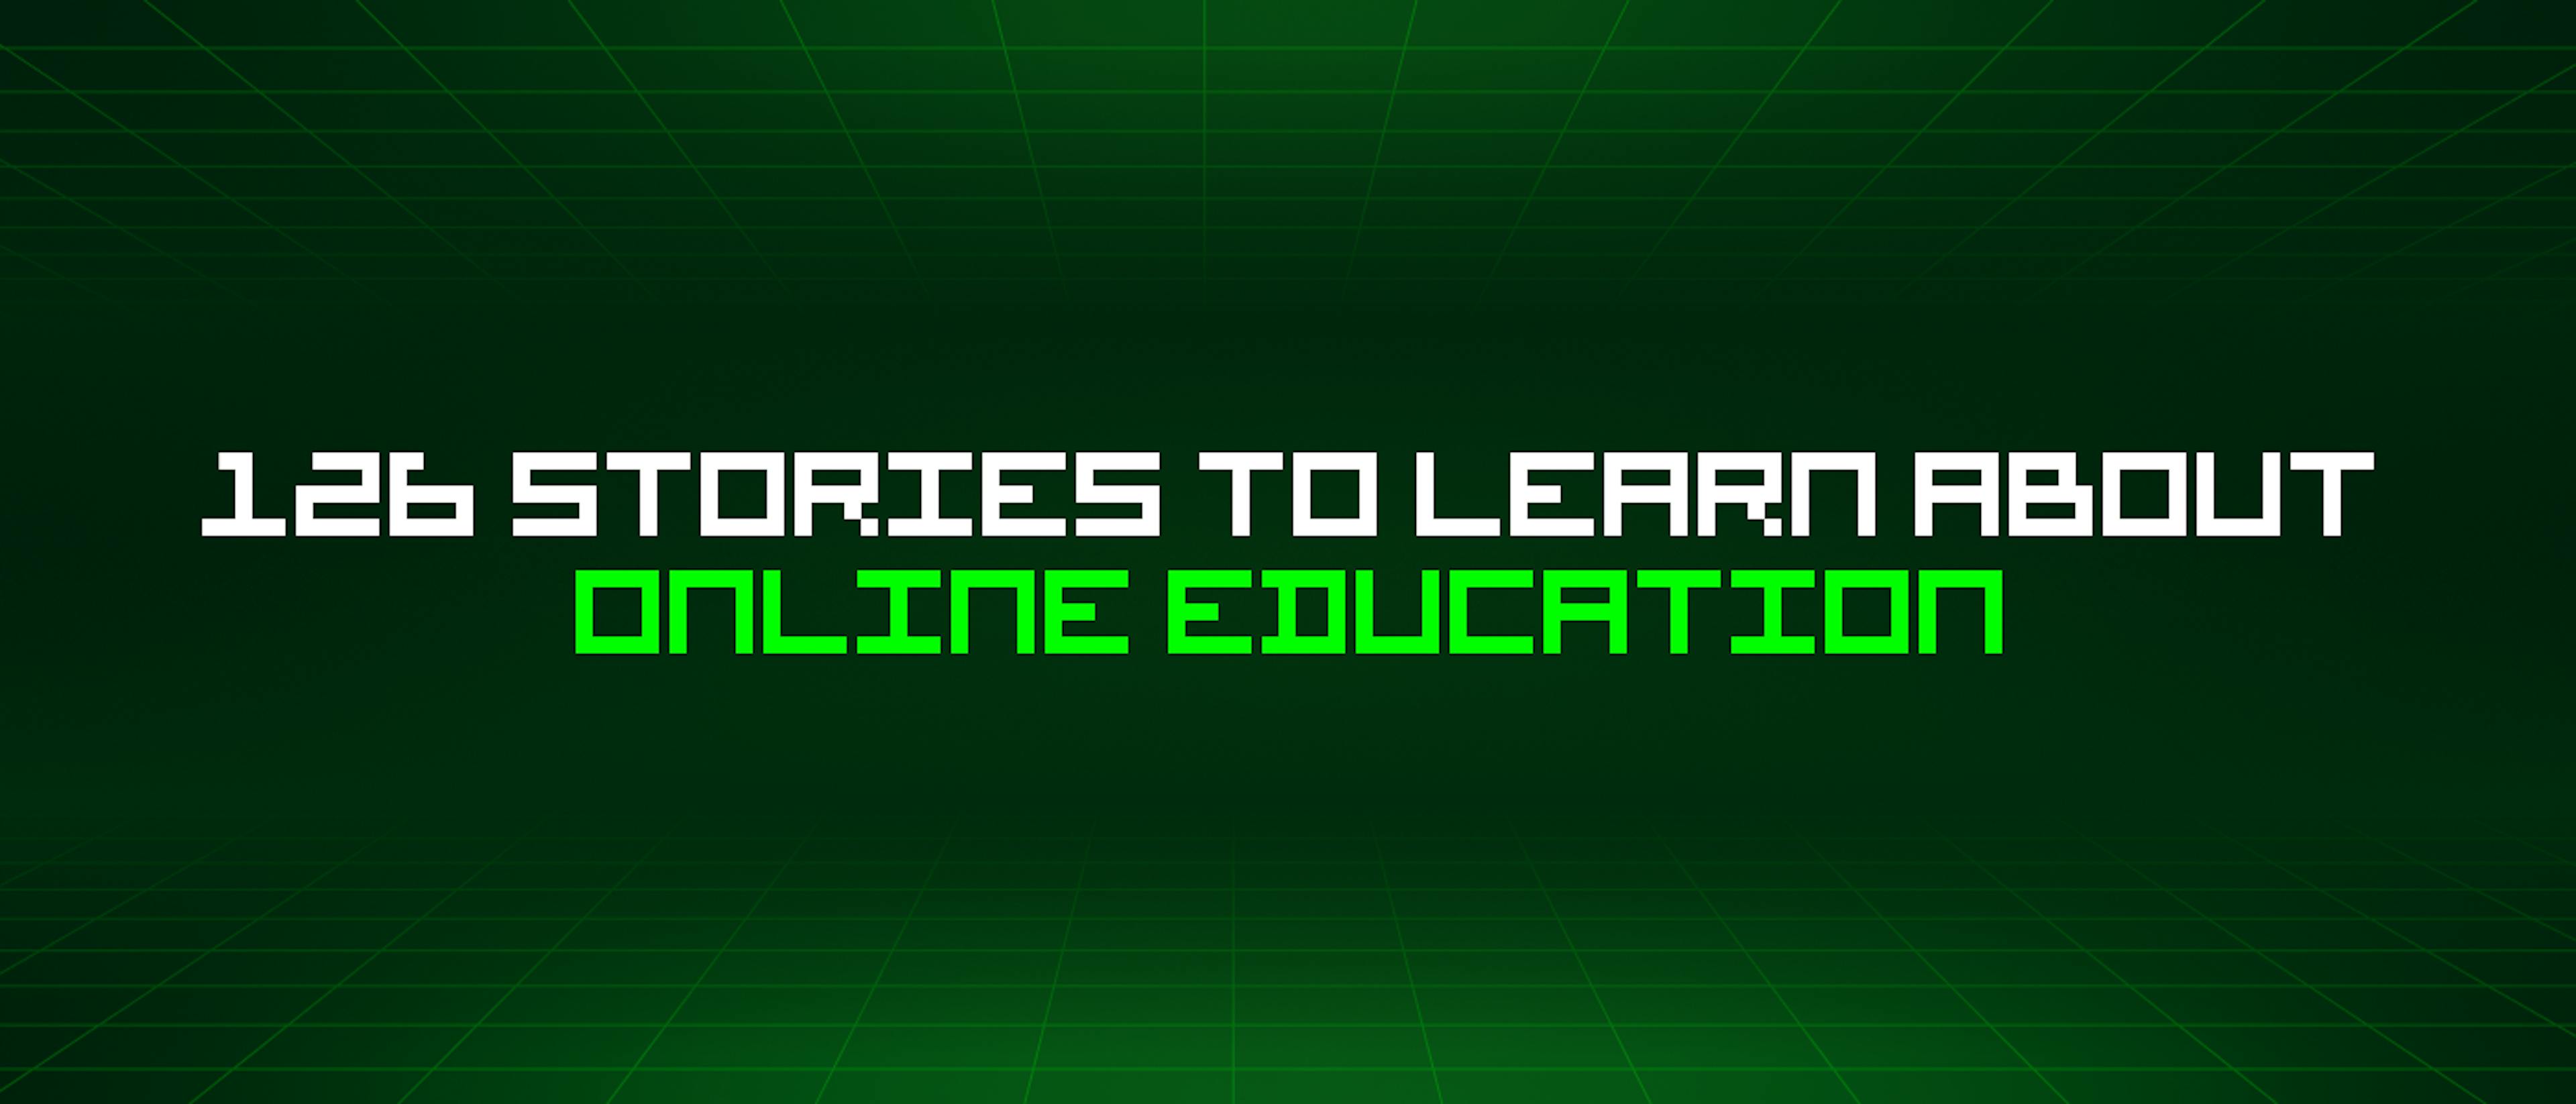 featured image - 126 Stories To Learn About Online Education